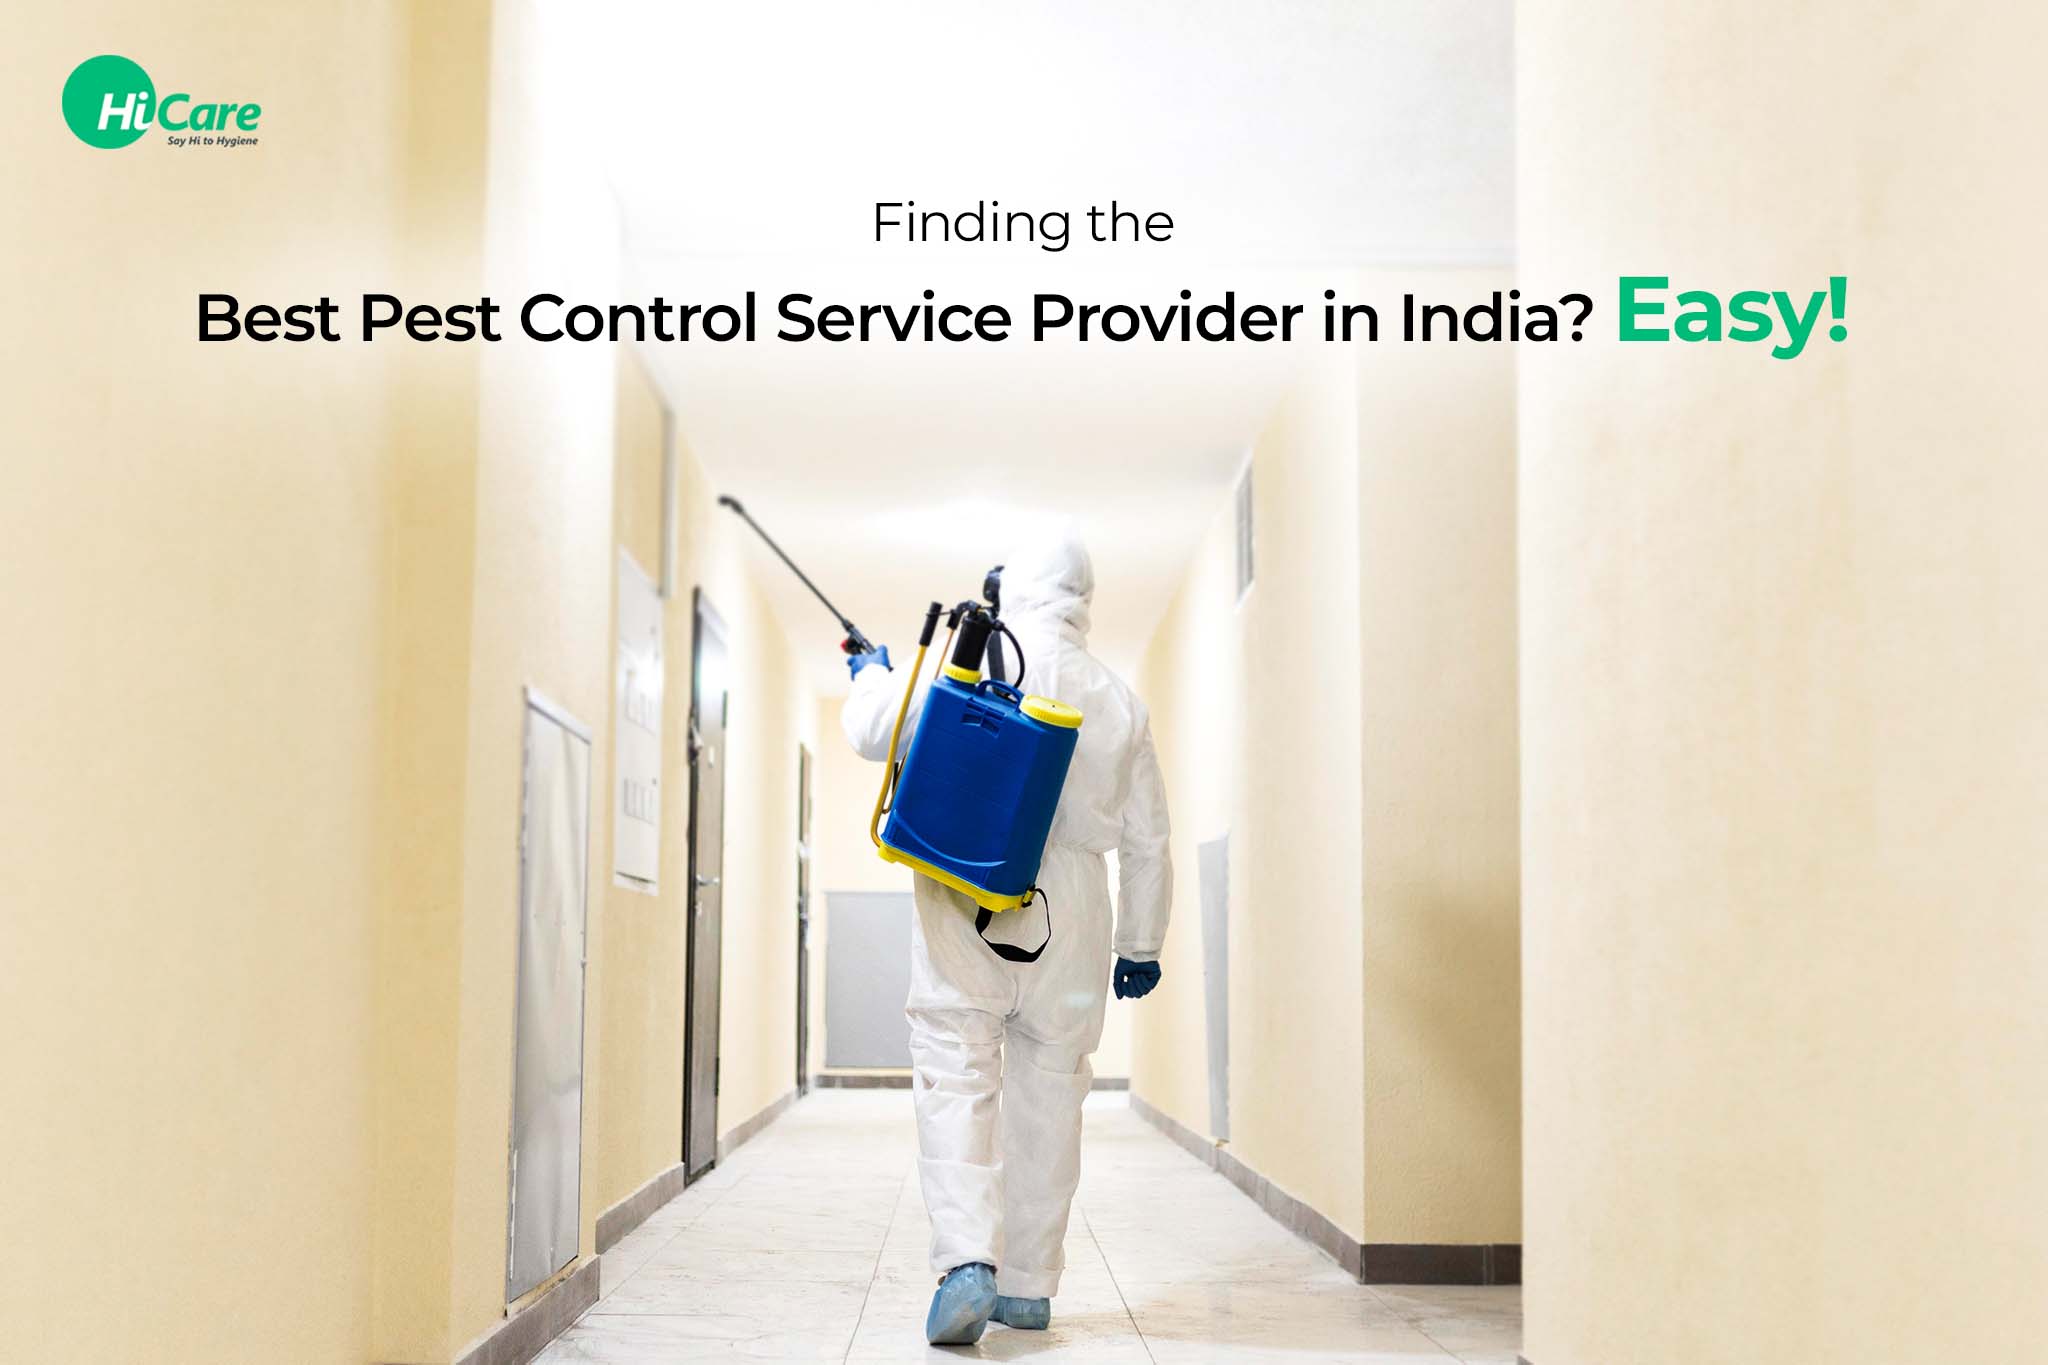 Finding the Best Pest Control Service Provider in India? Easy!